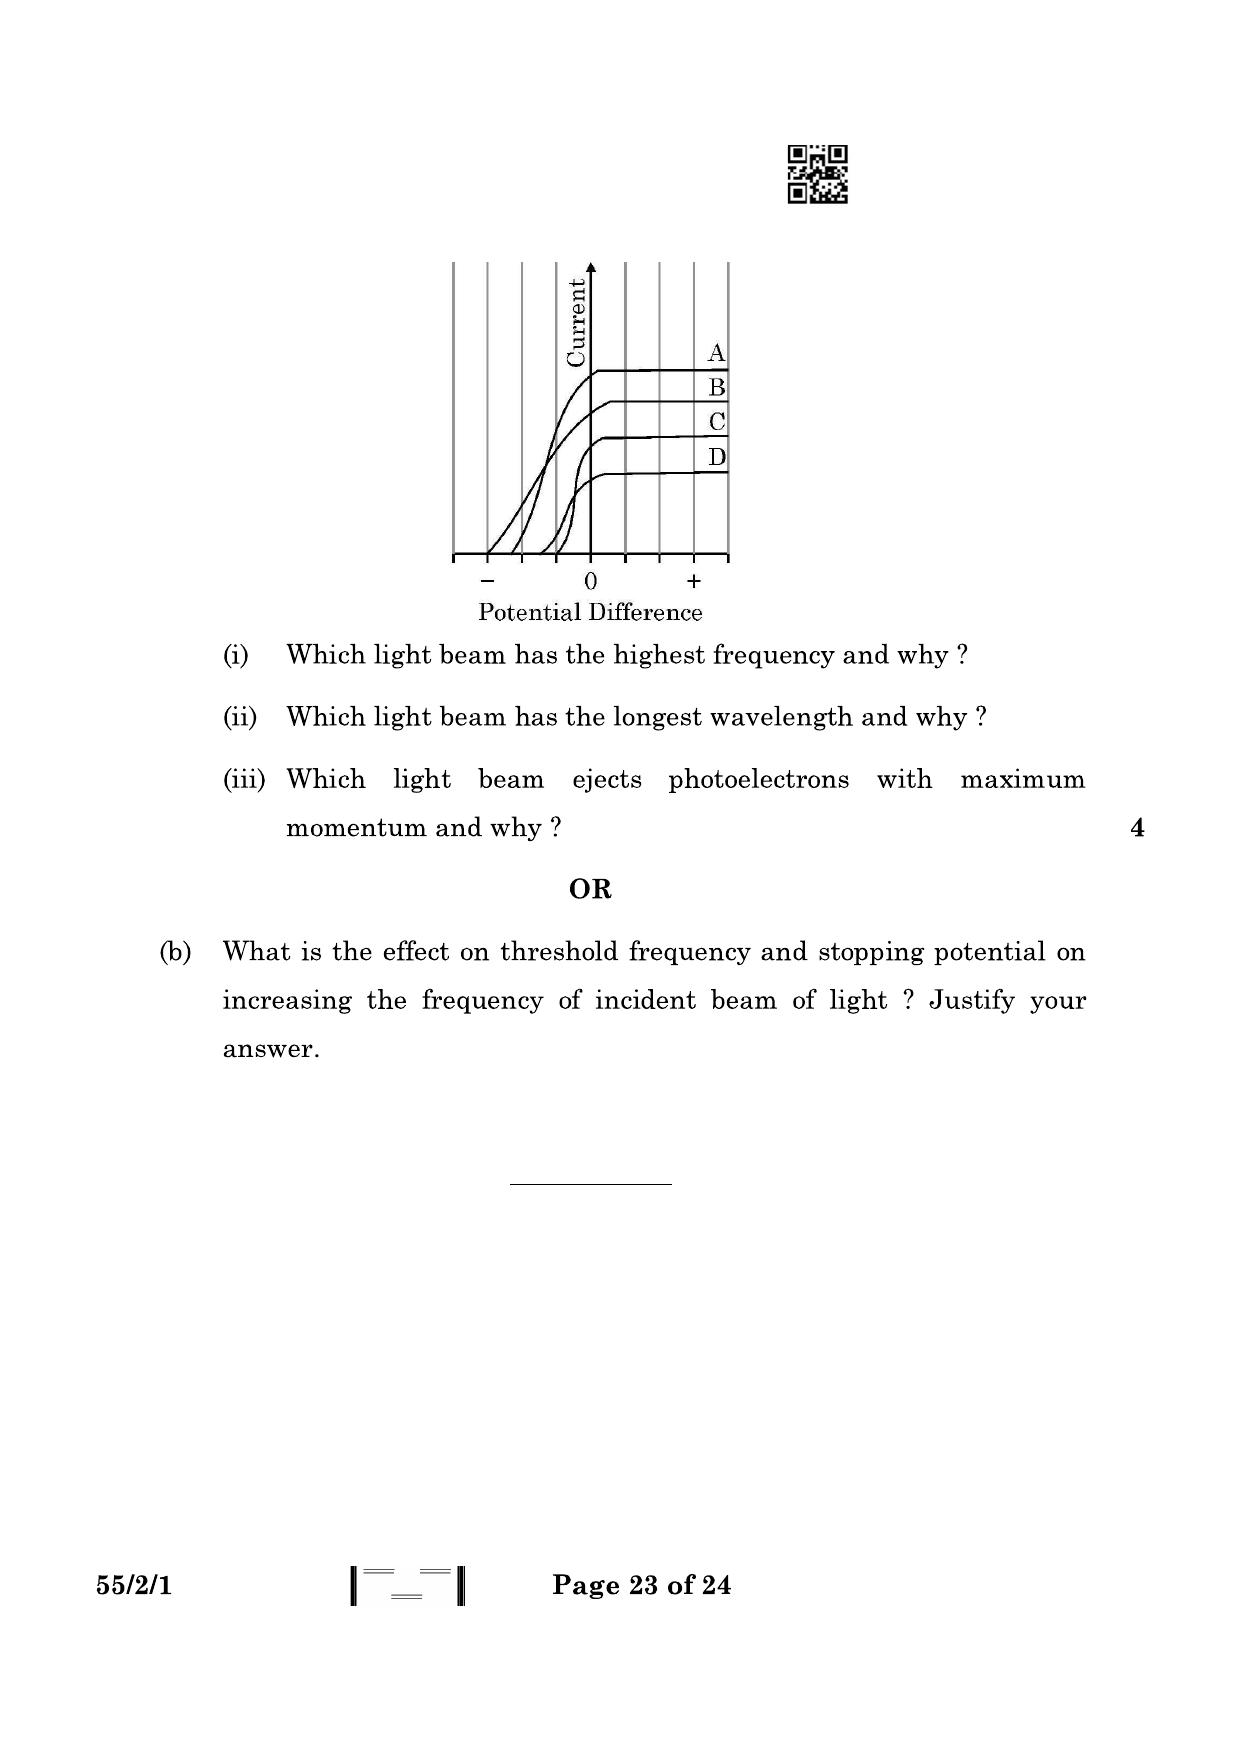 CBSE Class 12 55-2-1 Physics 2023 Question Paper - Page 23